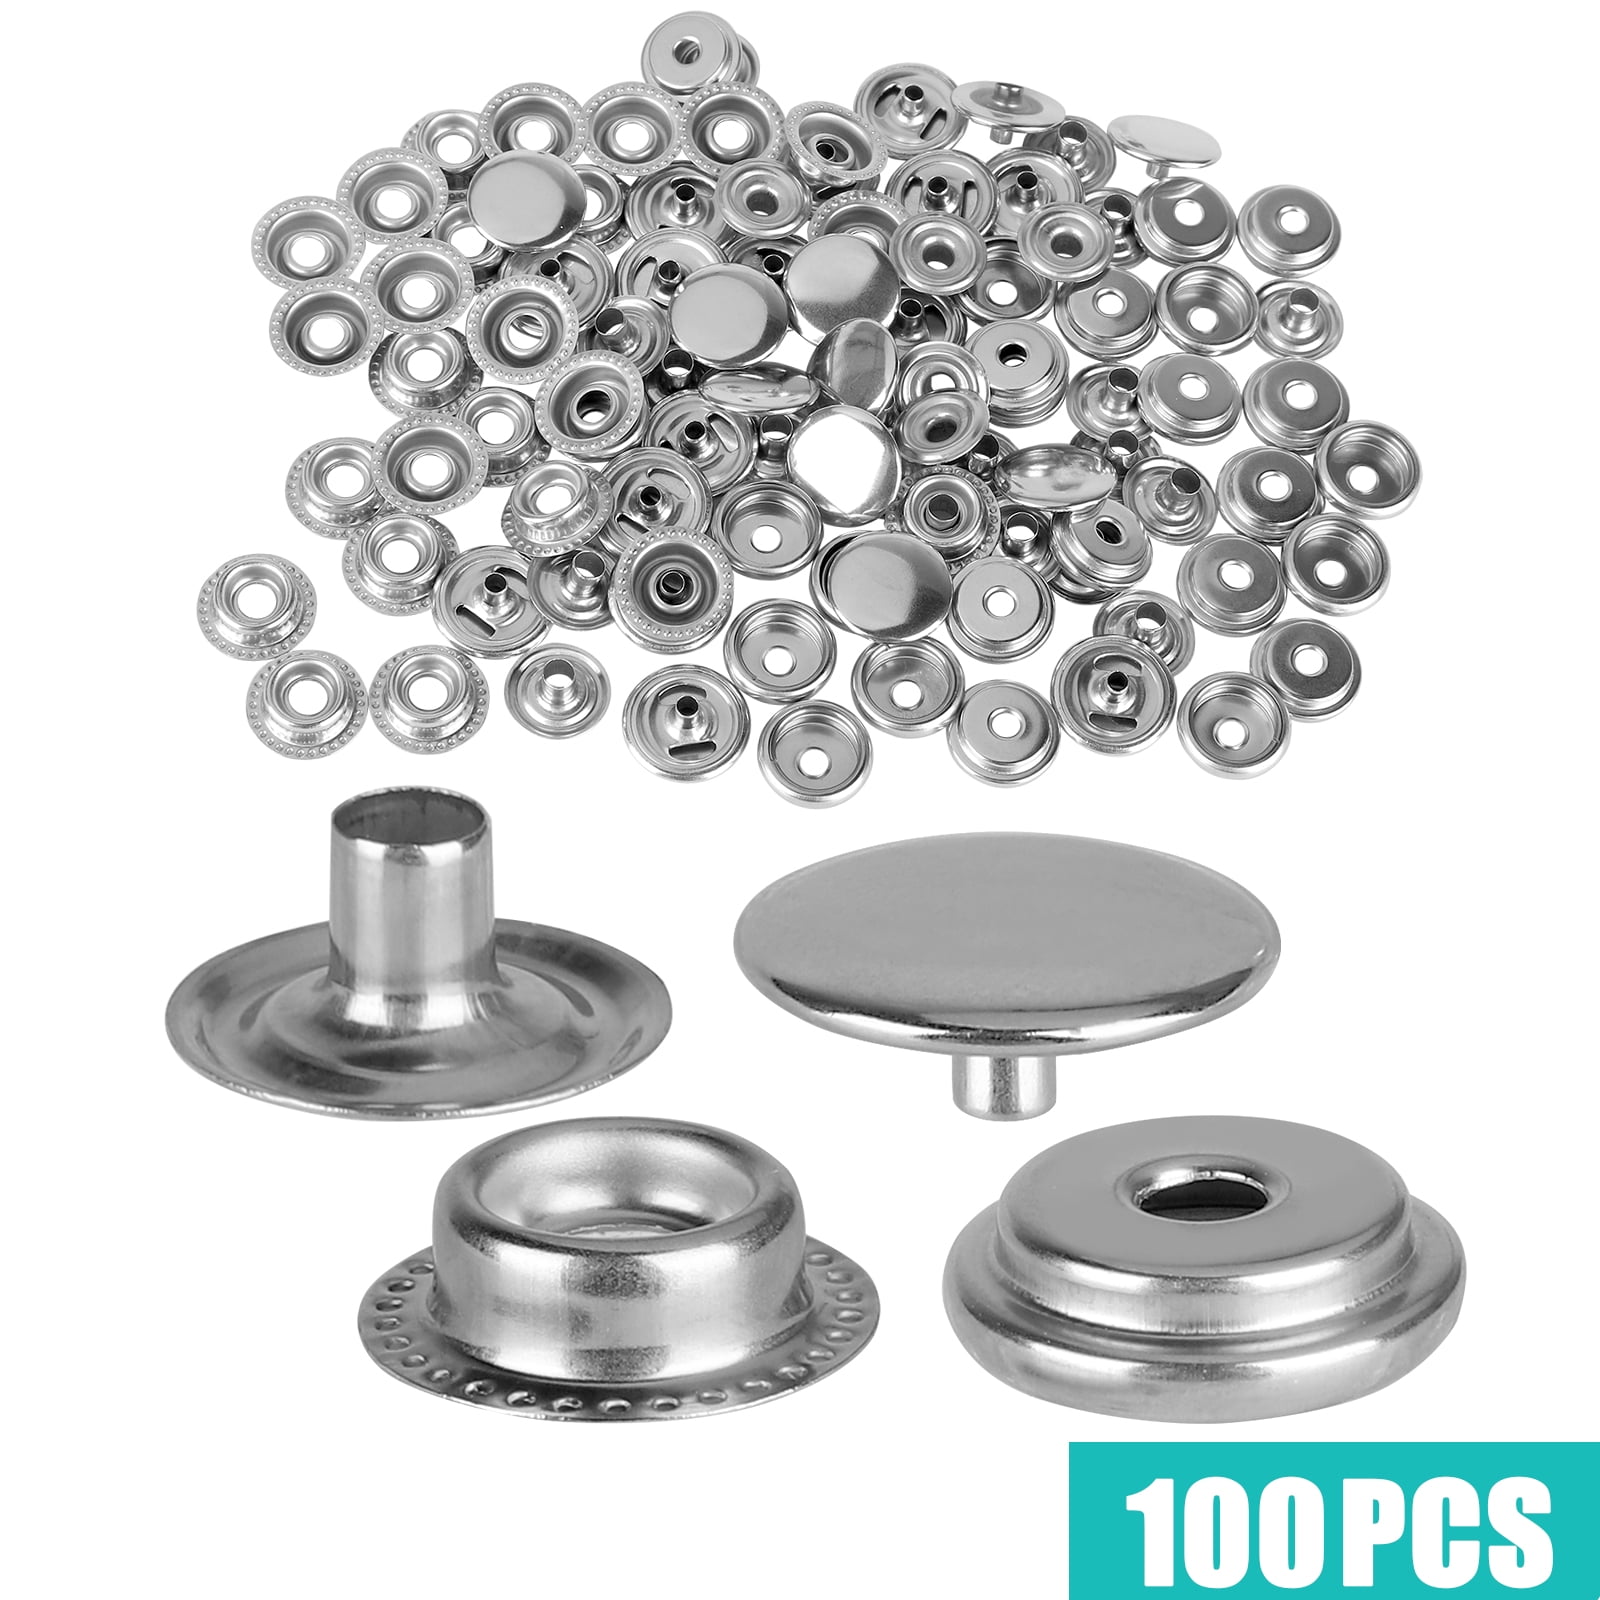  100 PCS 15MM Snap Fastener Kit Tool Snap Button kit Snaps for  Leather Leather Snaps and Fasteners Kit for High Grade Metal Material Snaps  for Bag, Jeans, Clothes, Fabric